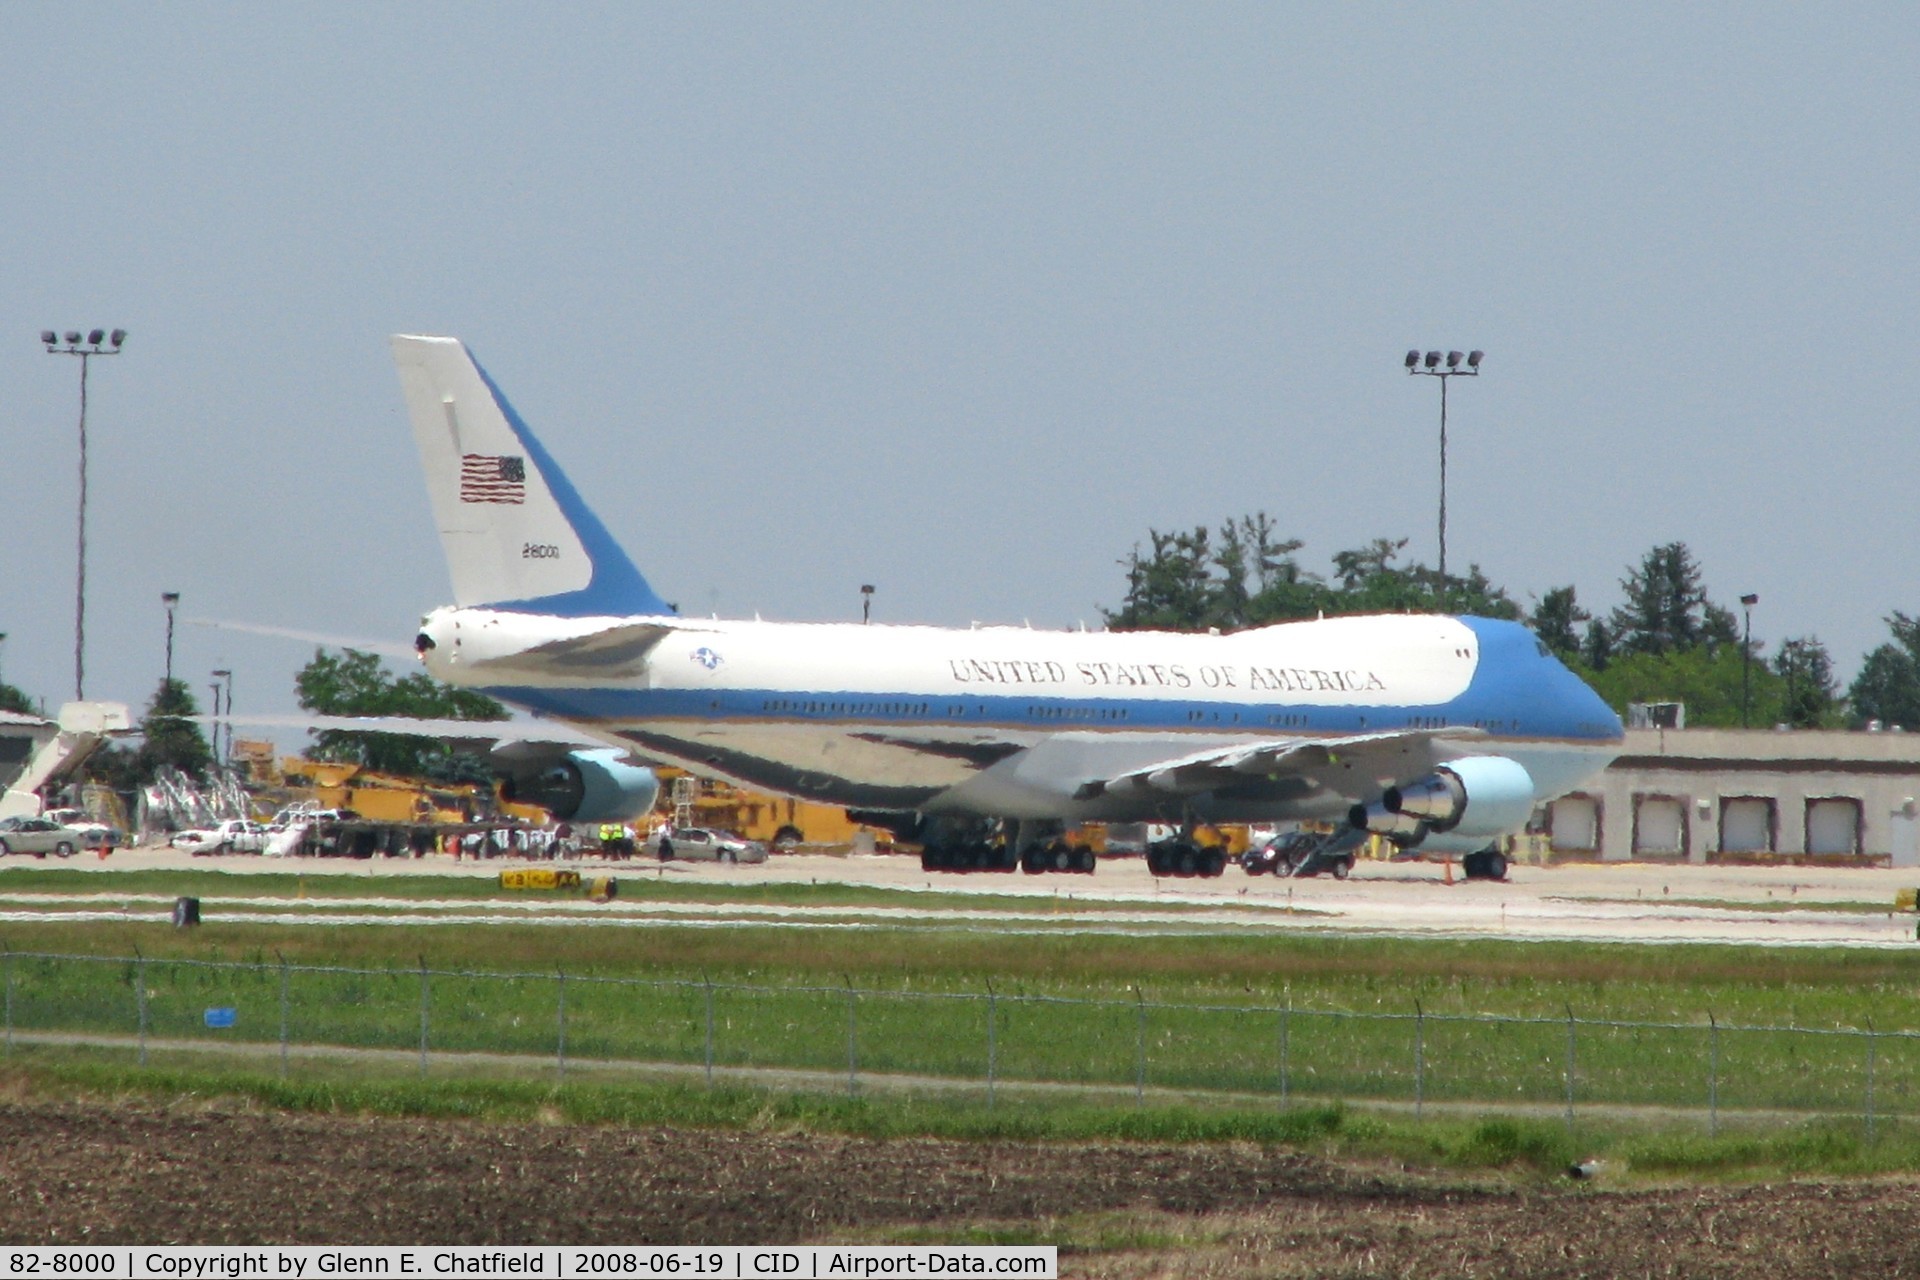 82-8000, 1987 Boeing VC-25A (747-2G4B) C/N 23824, Presidental visit for flood survey.  Seen from about a mile south